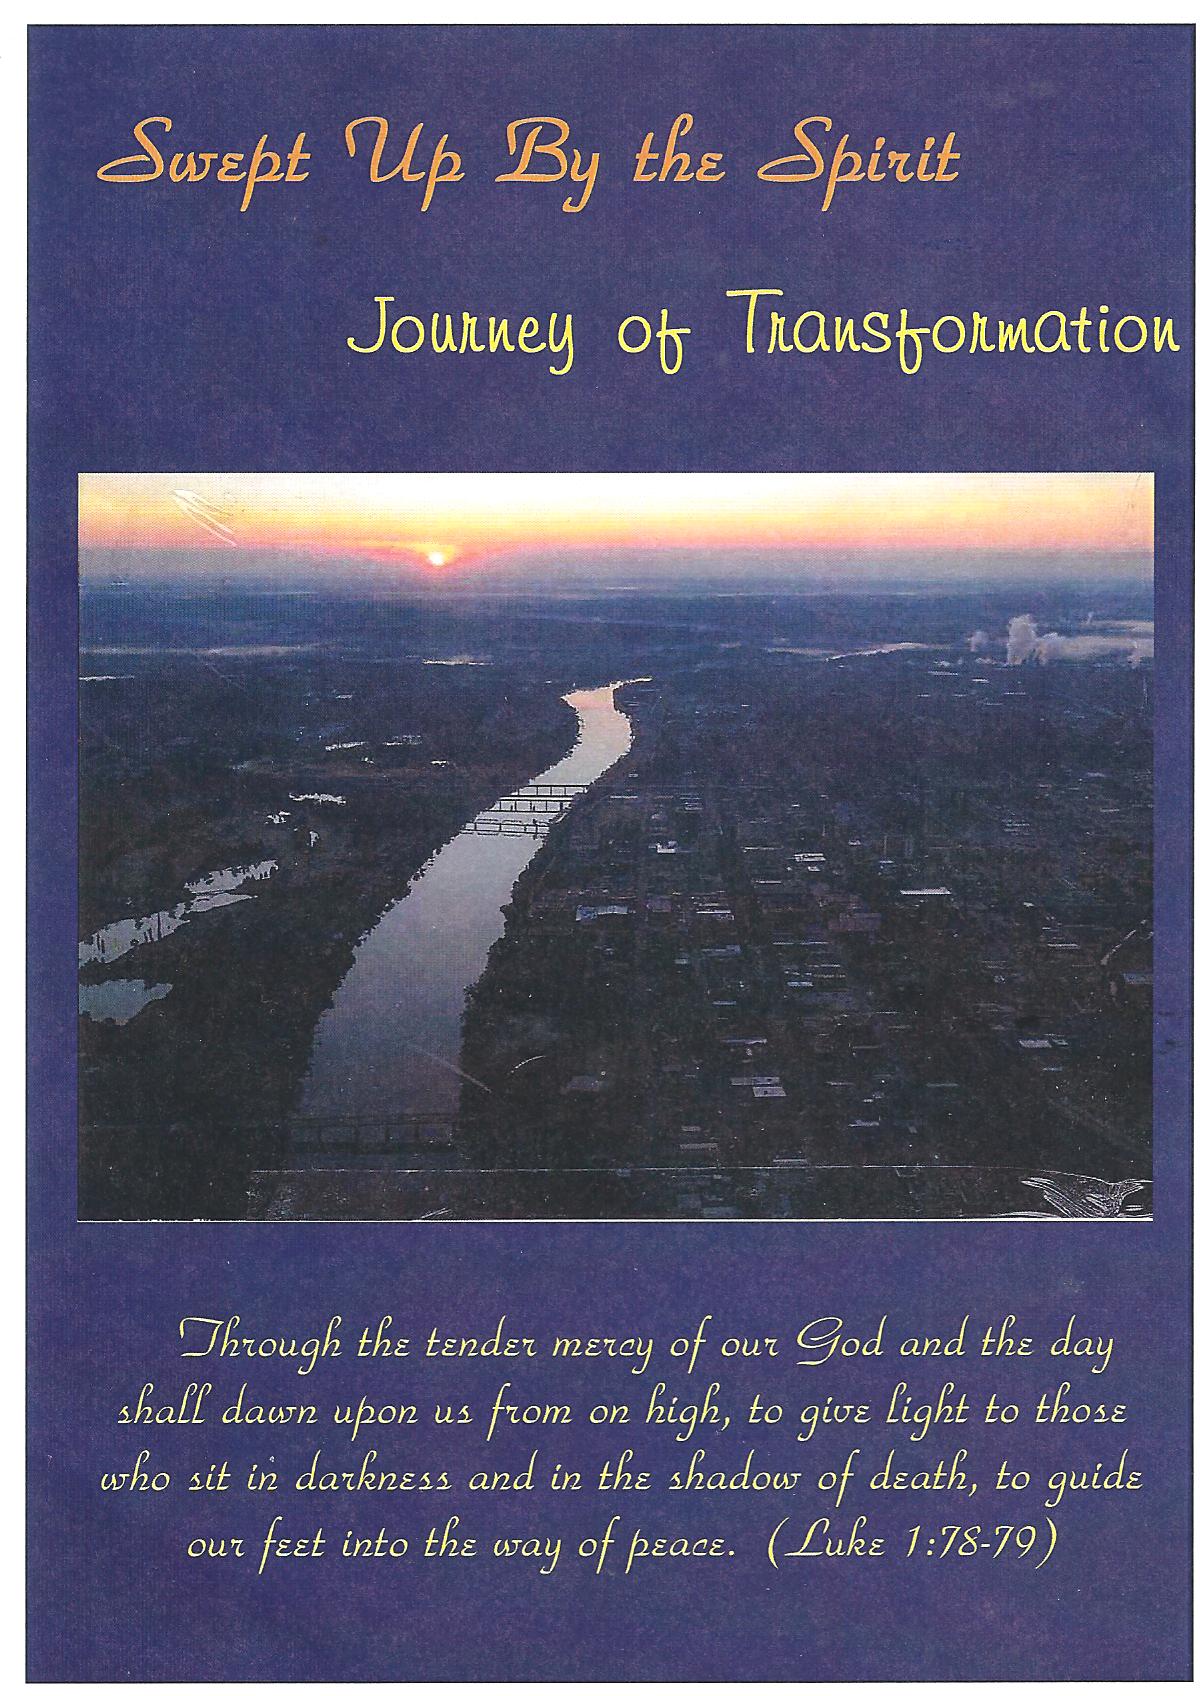 FREE: Swept Up by the Spirit Journey of Transformation by Gary Garner